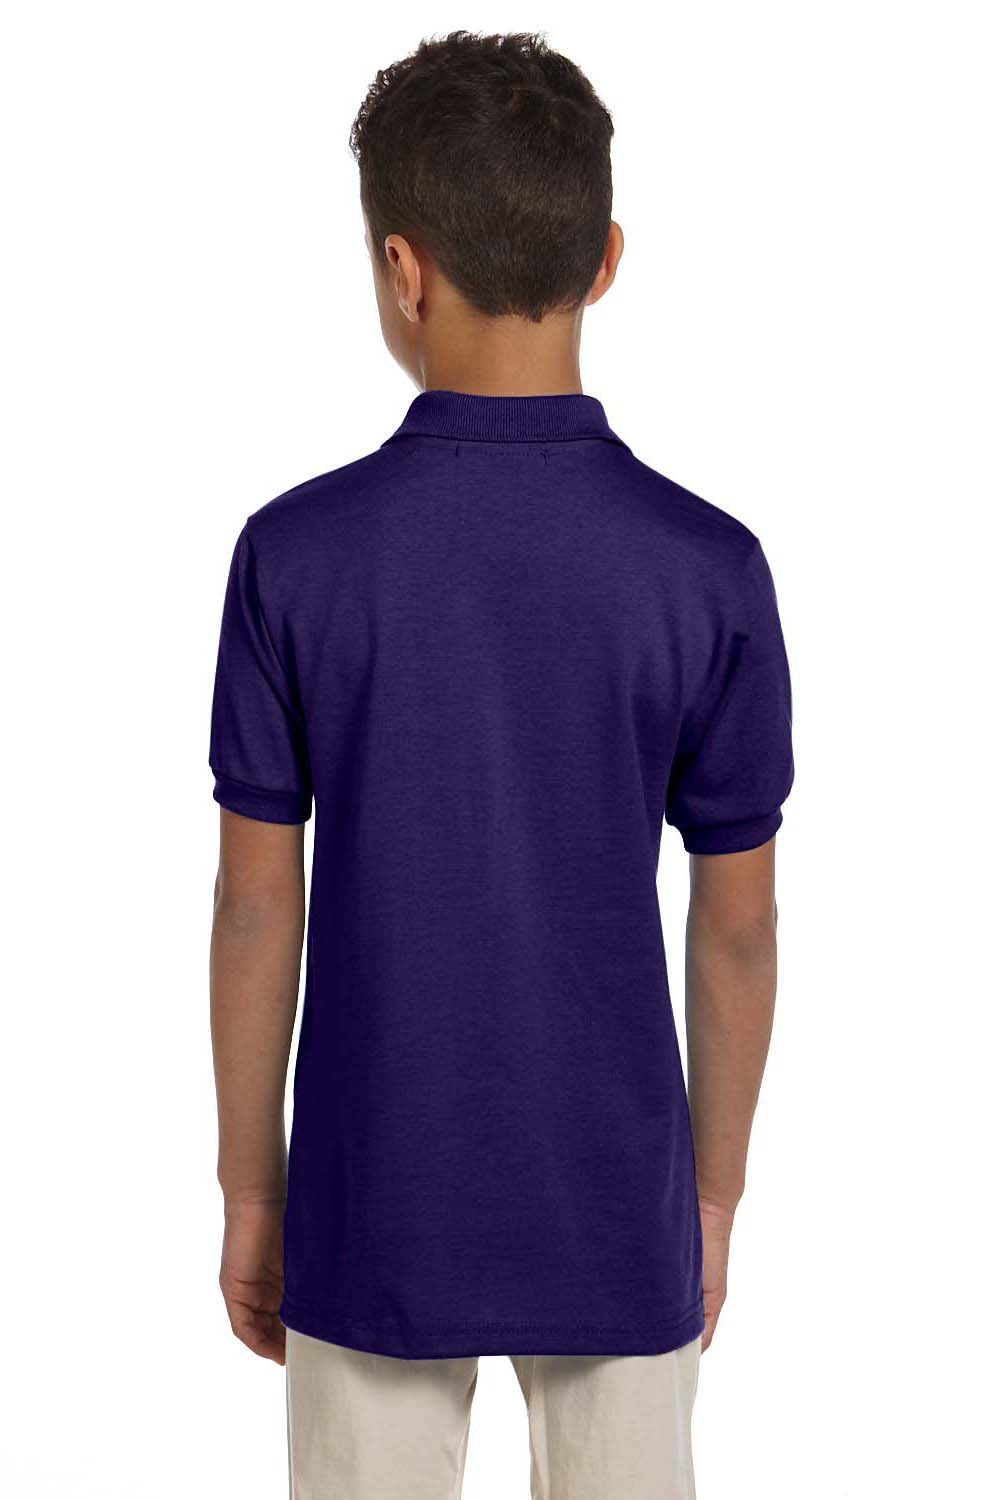 Jerzees 437Y Youth SpotShield Stain Resistant Short Sleeve Polo Shirt Purple Back